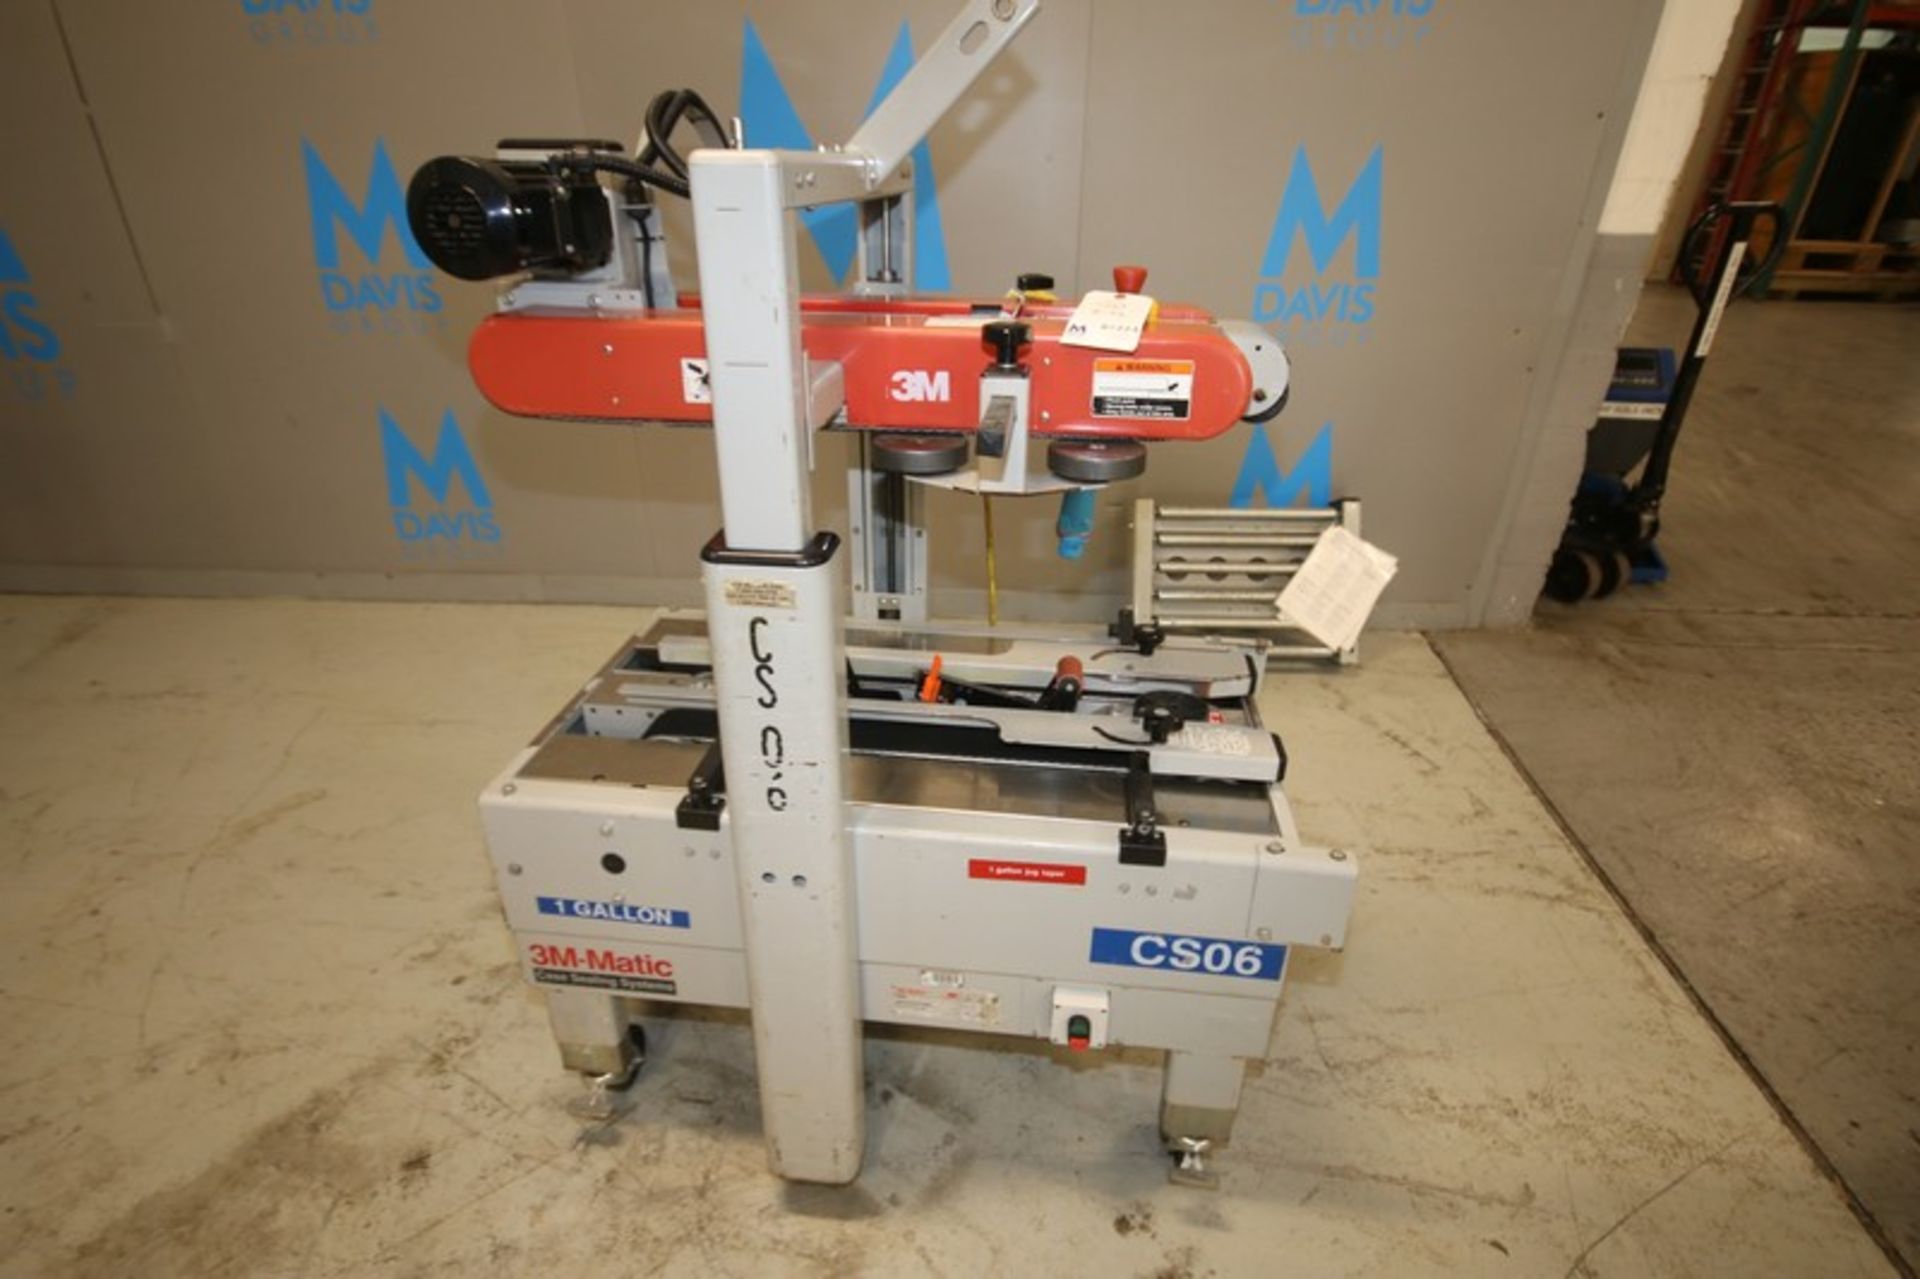 3M-Matic Adjustable Case Sealer, Series 700A, Type: 39600, SN 10615, Includes Bottom Cartridge, 115V